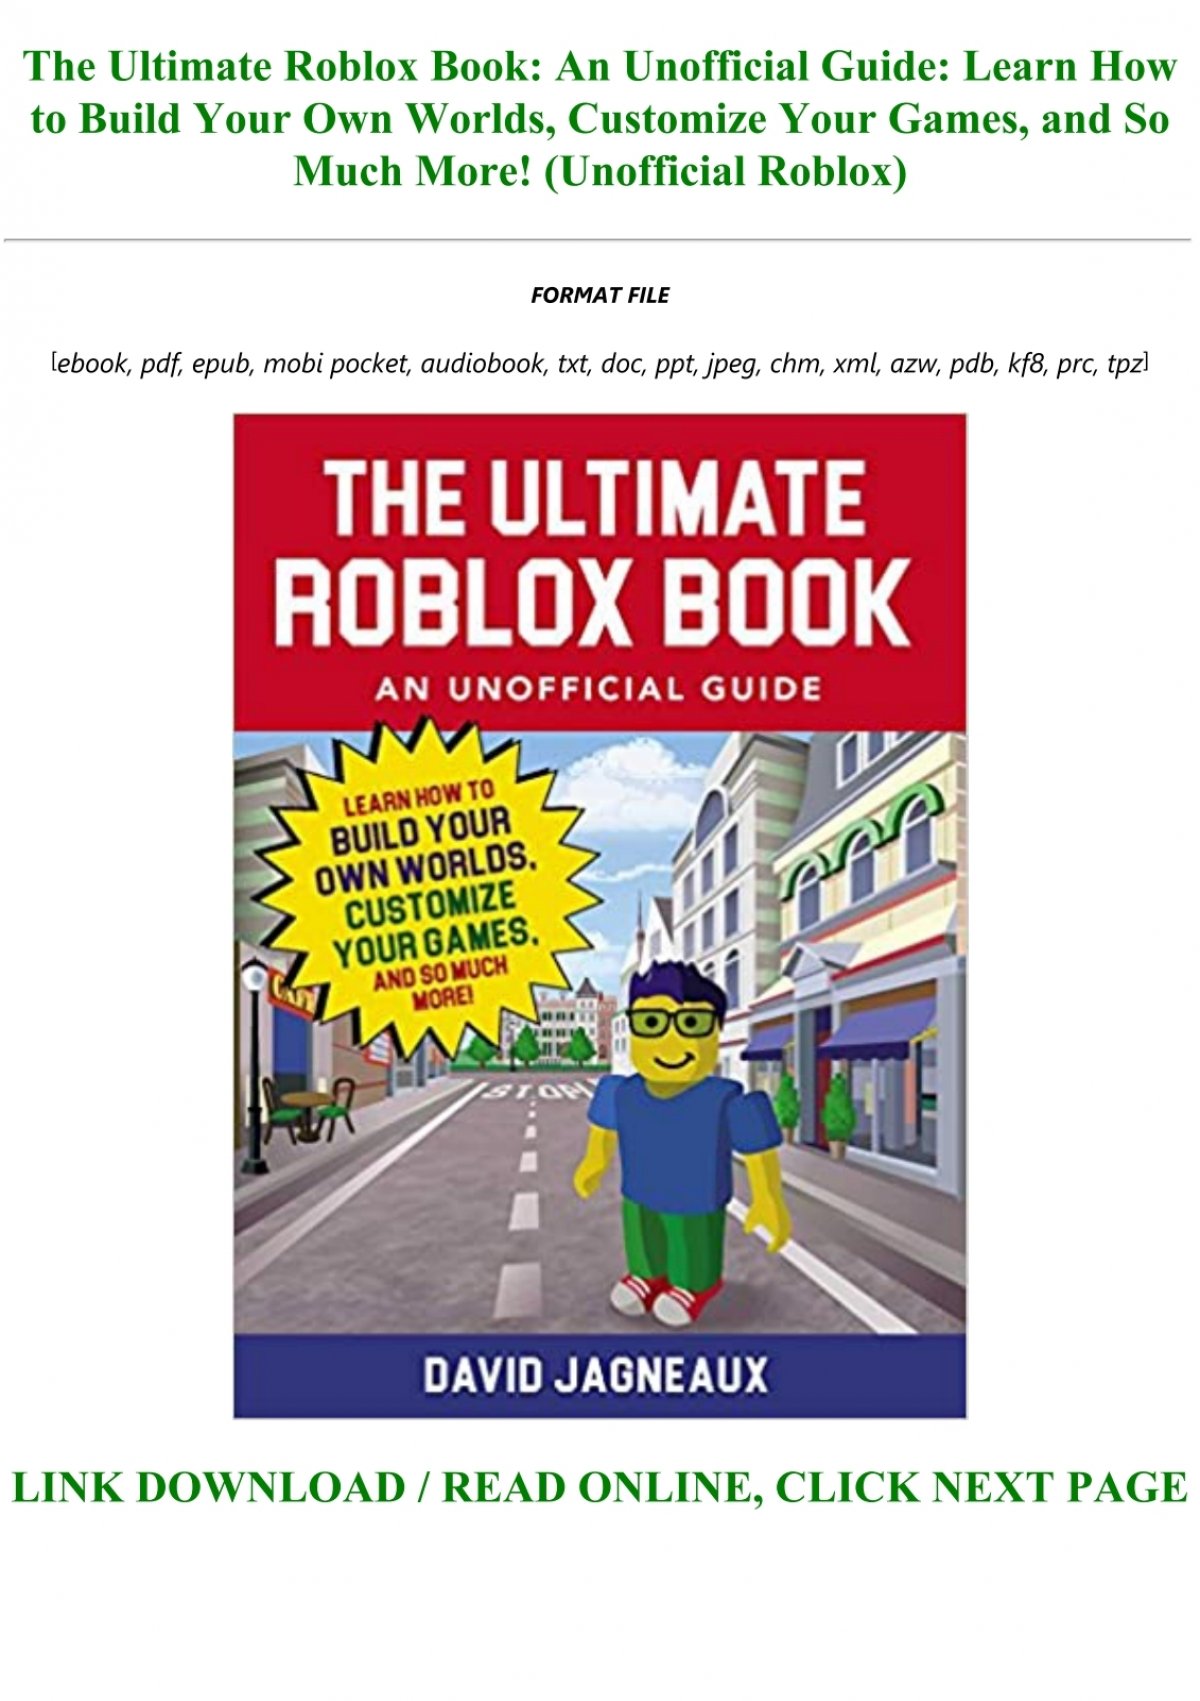 P D F Download The Ultimate Roblox Book An Unofficial Guide Learn How To Build Your Own Worlds Customize Your Games And So Much More Unofficial Roblox Full Pdf - download roblox the complete guide learn how to create your own